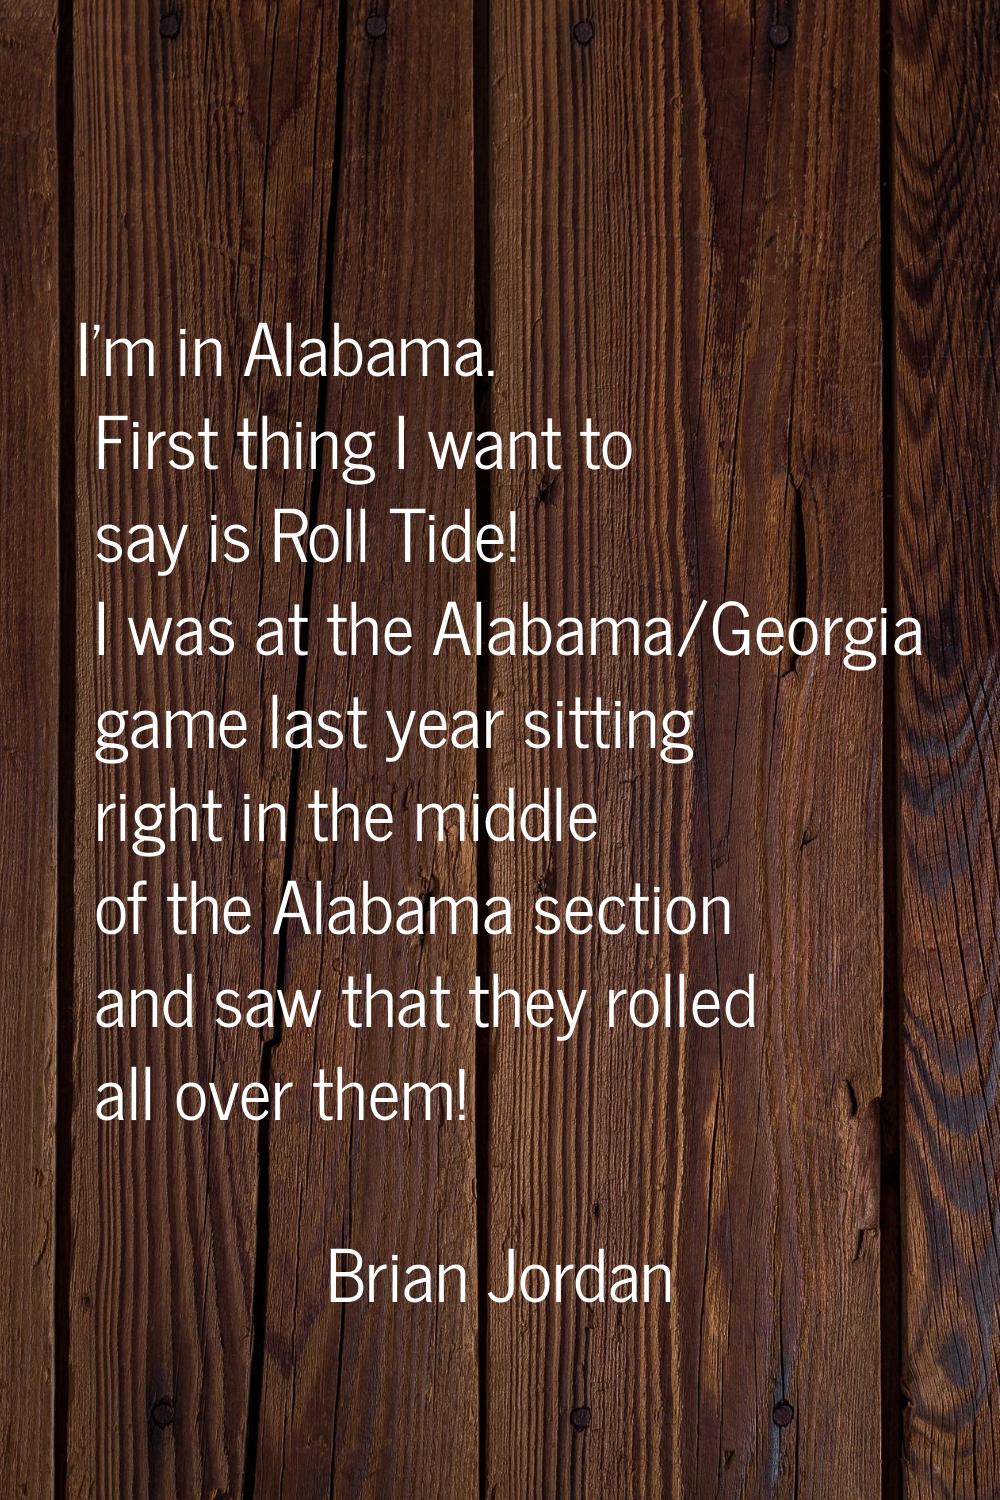 I'm in Alabama. First thing I want to say is Roll Tide! I was at the Alabama/Georgia game last year